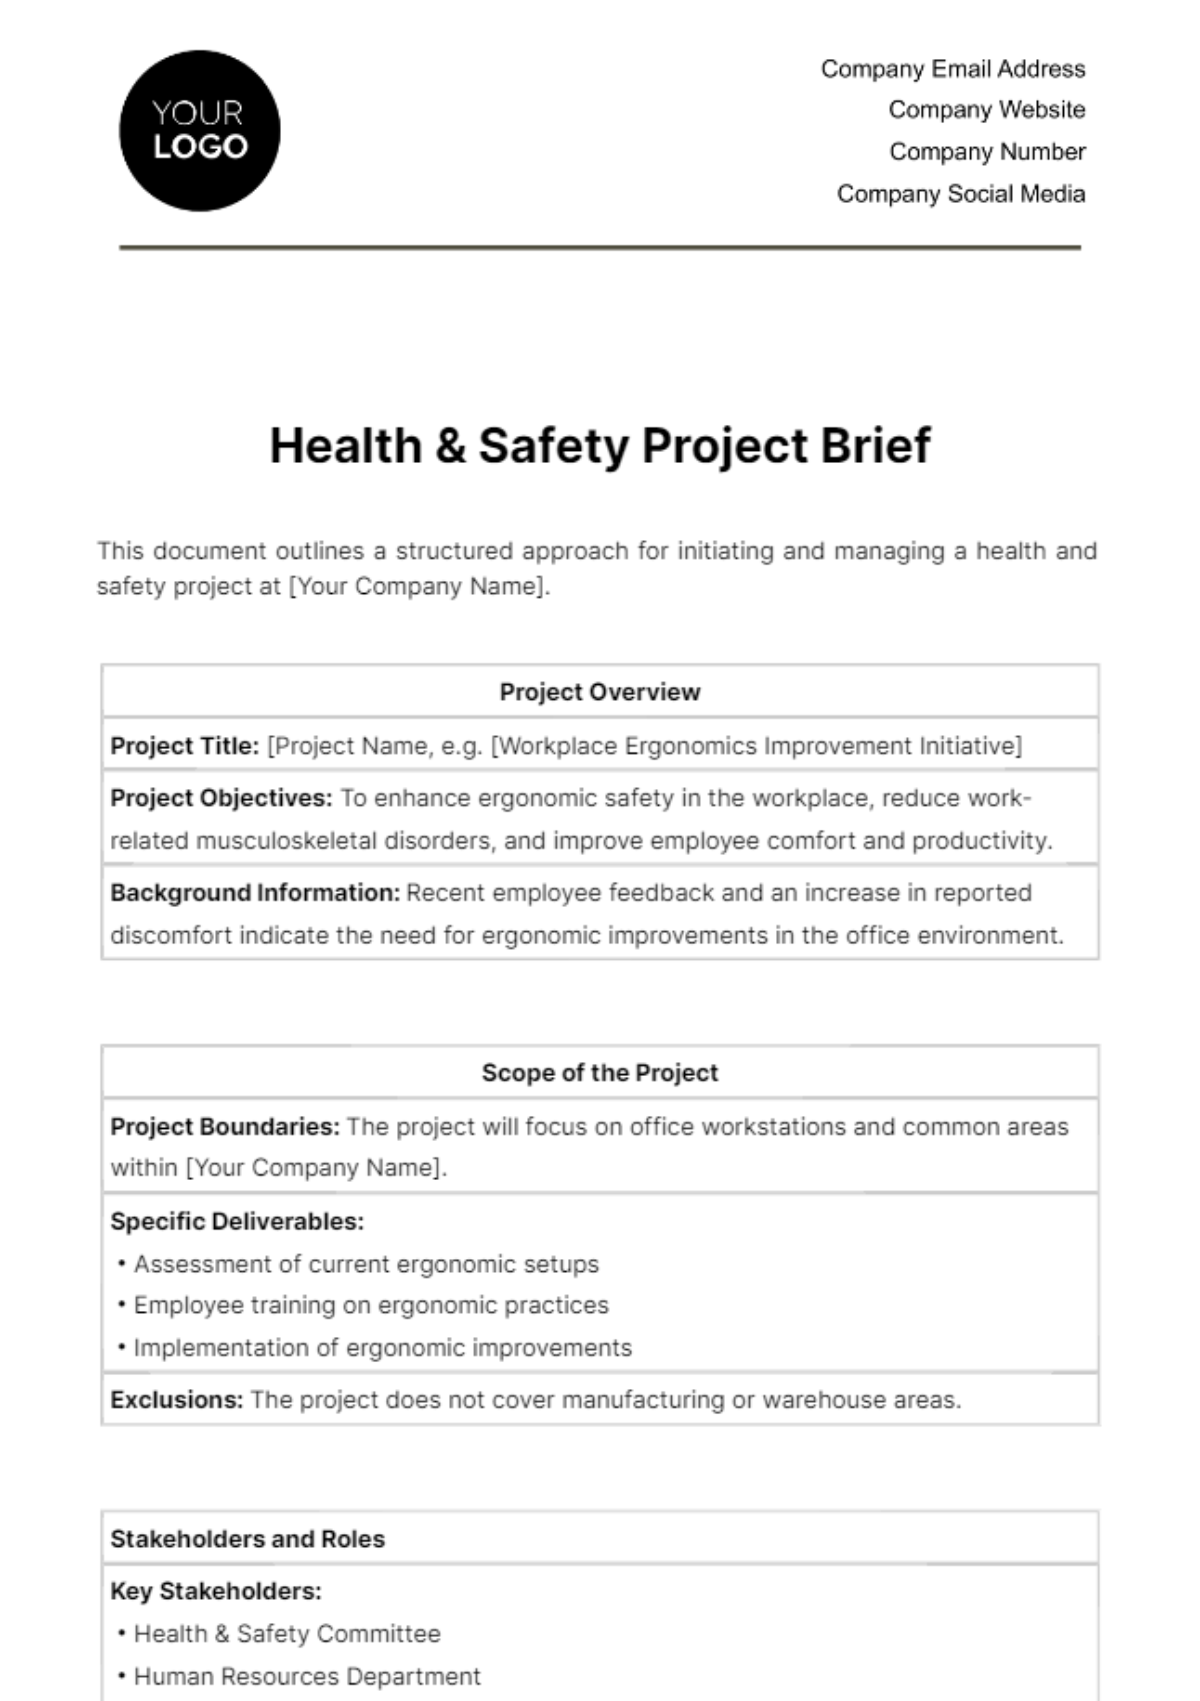 Health & Safety Project Brief Template